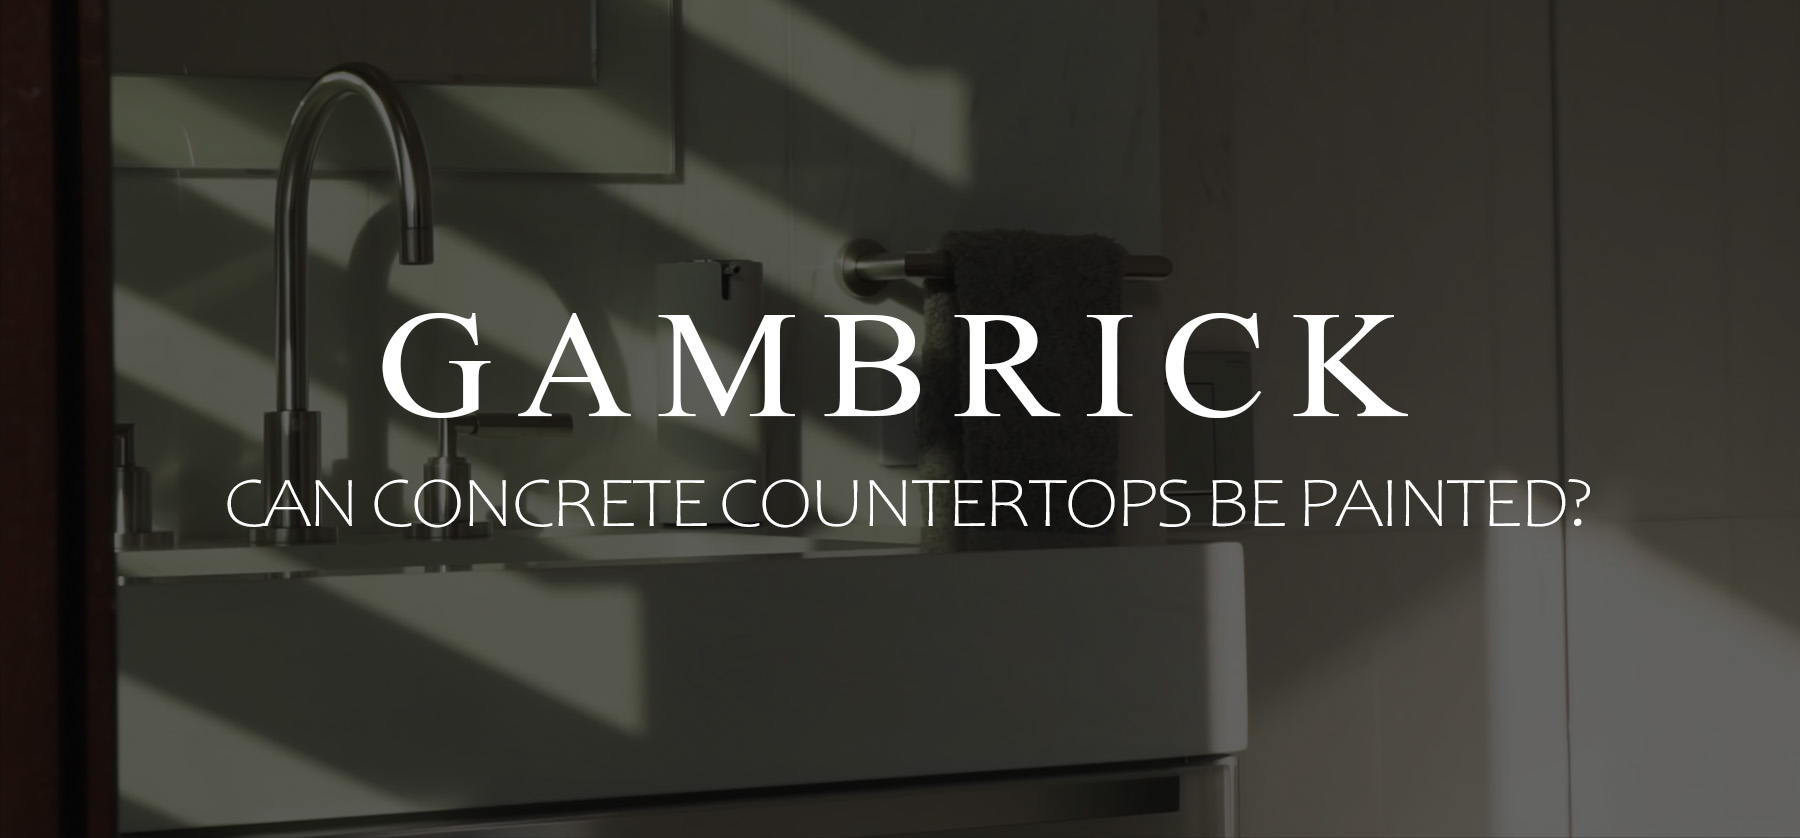 can concrete countertops be painted banner